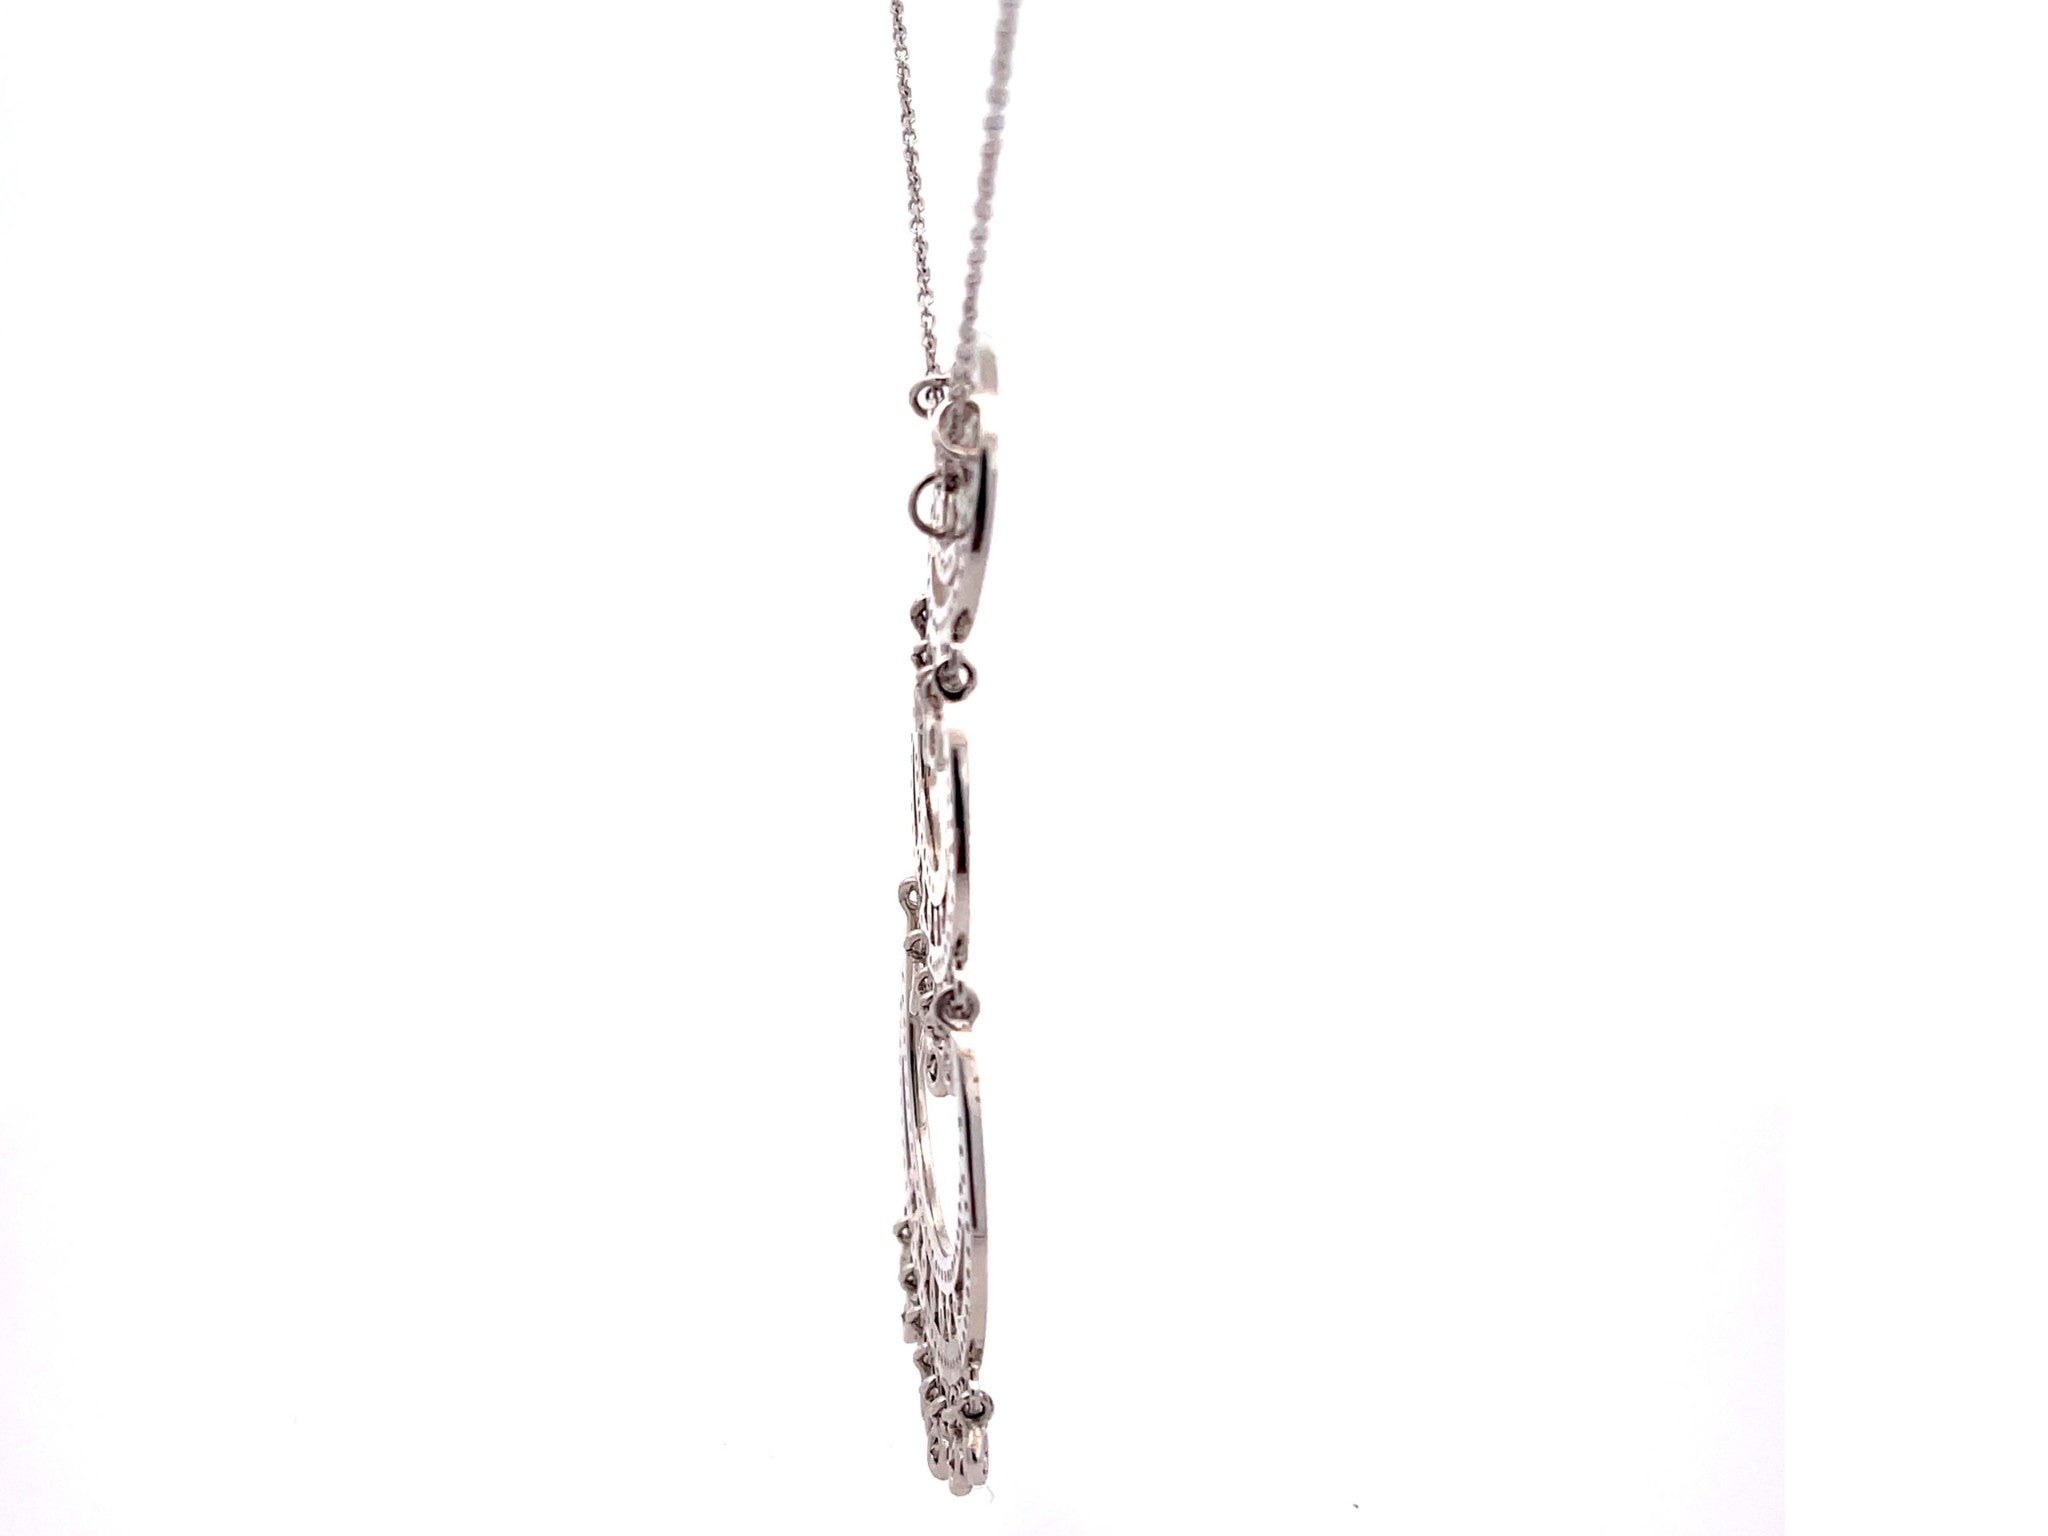 Large Drop Pendant with White and Chocolate Diamonds in 18k White Gold